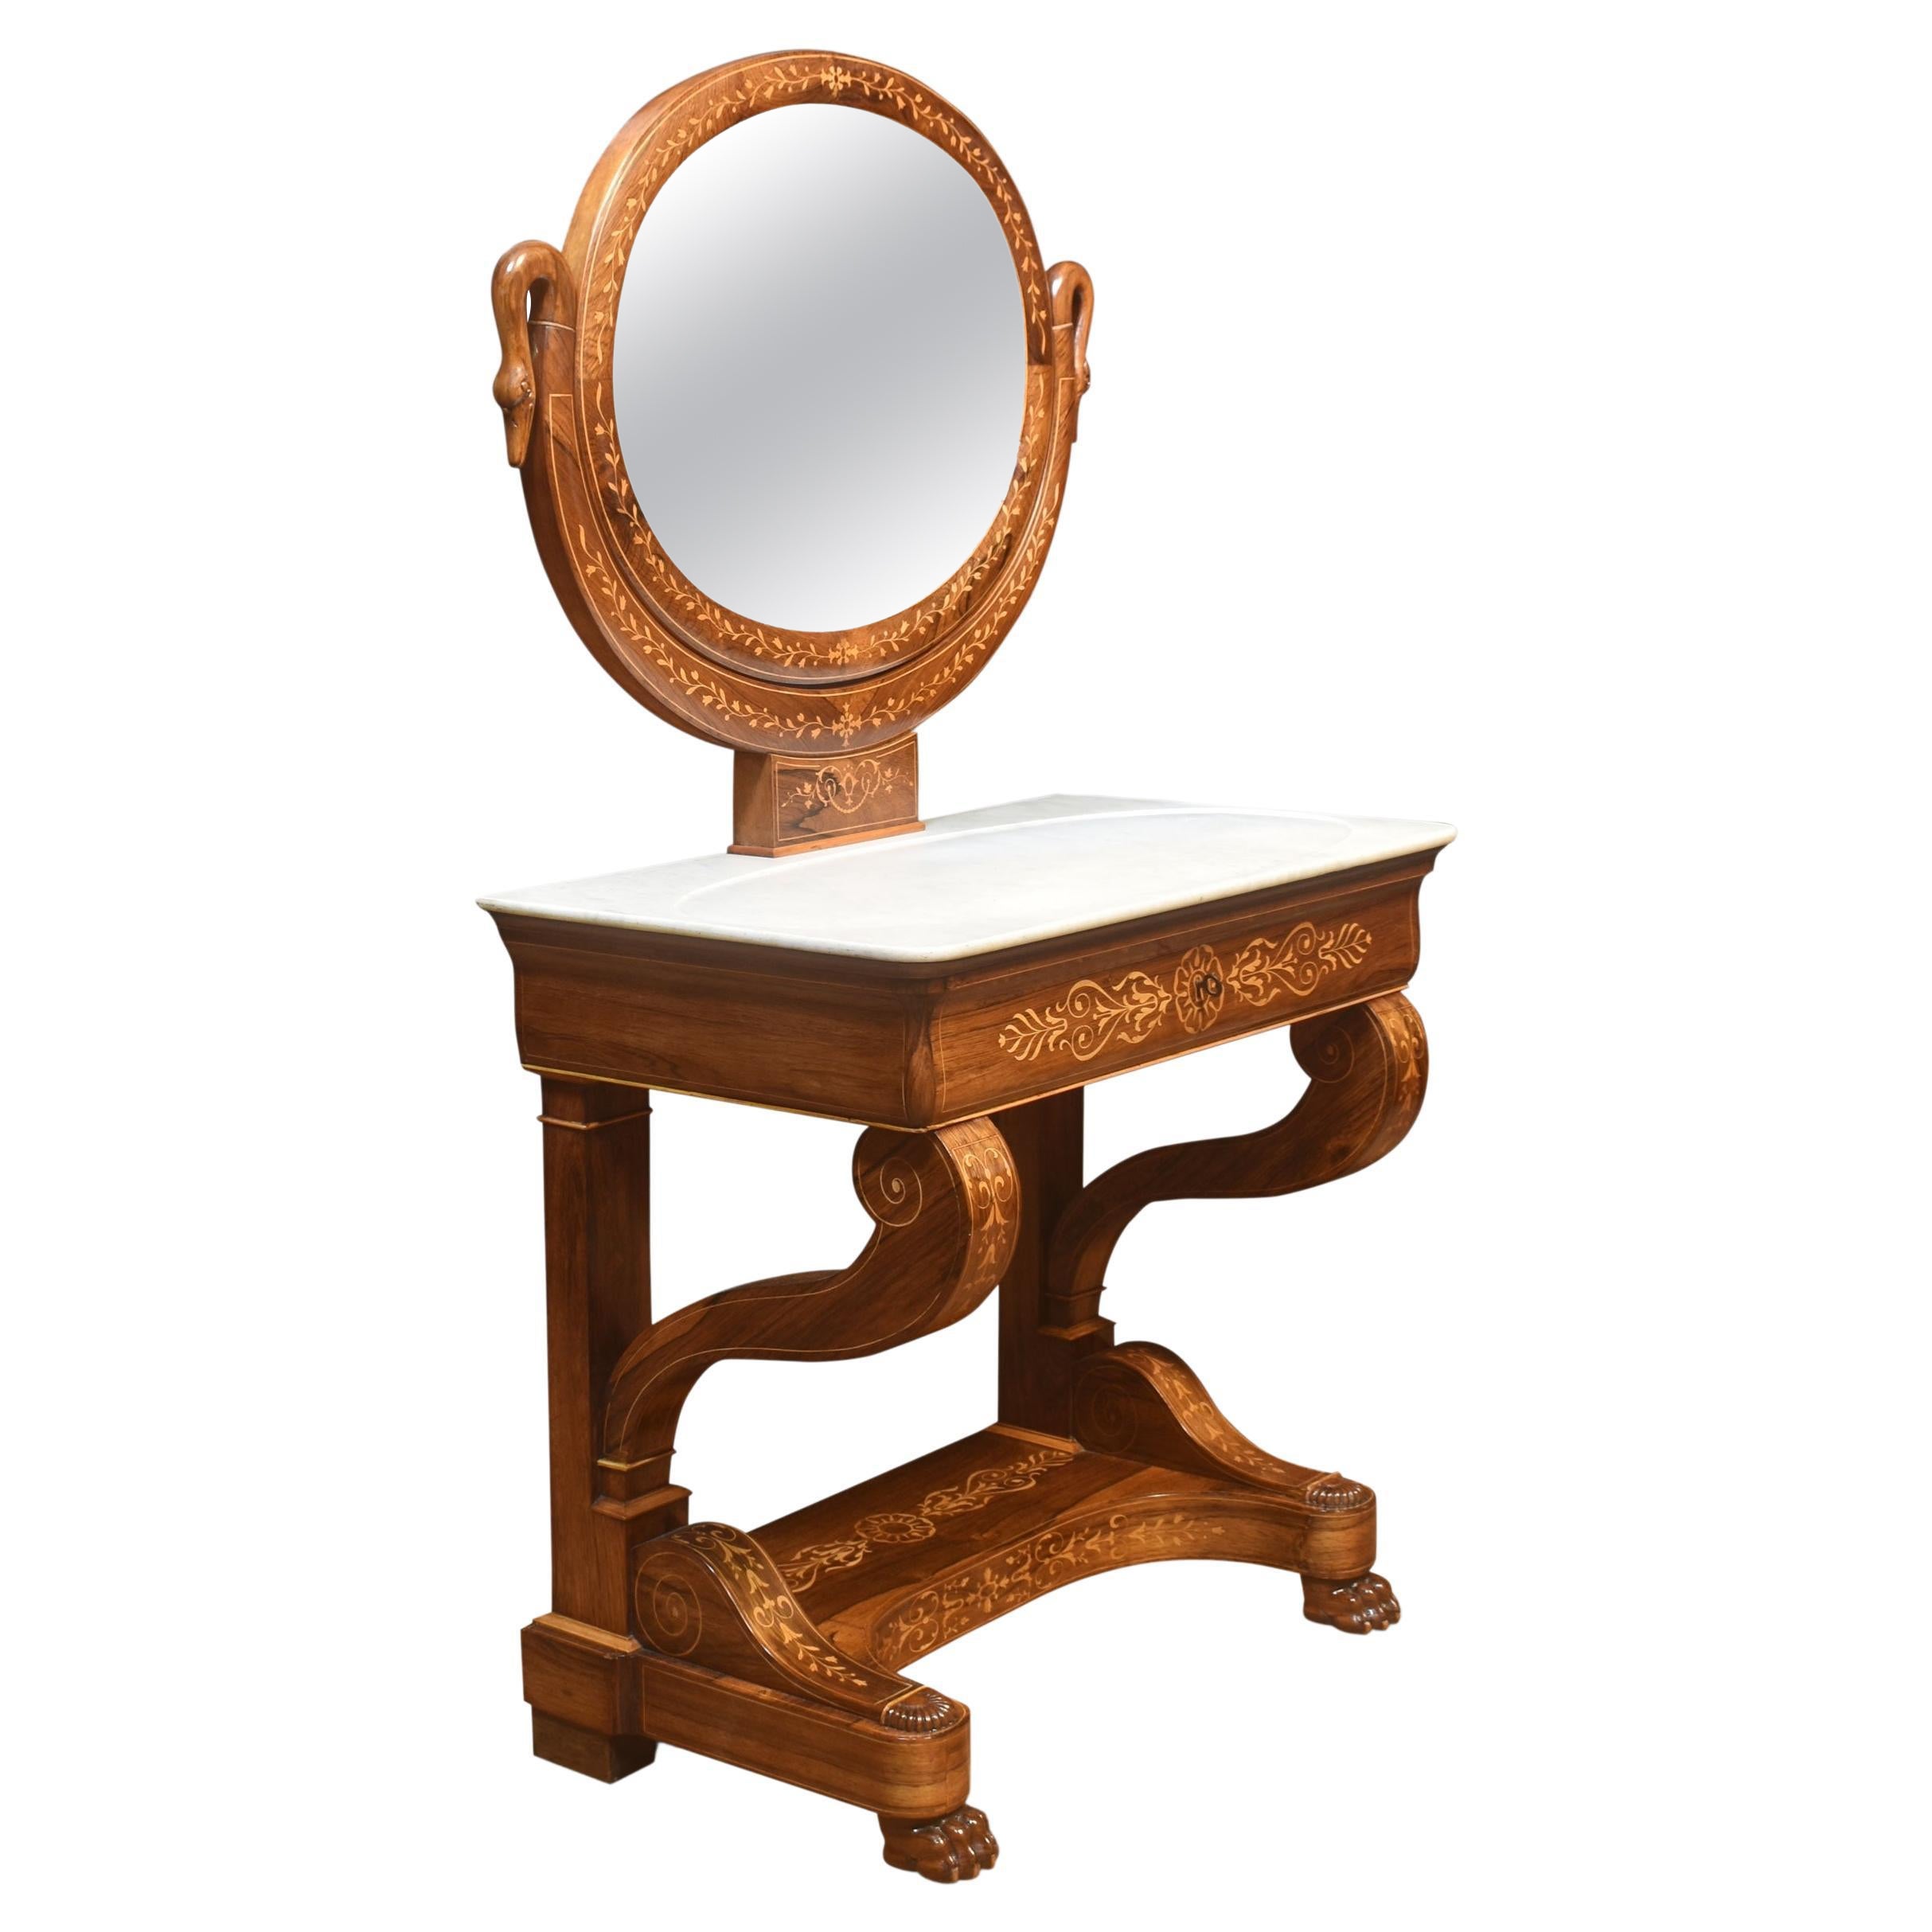 19th Century, Inlaid Dressing Table